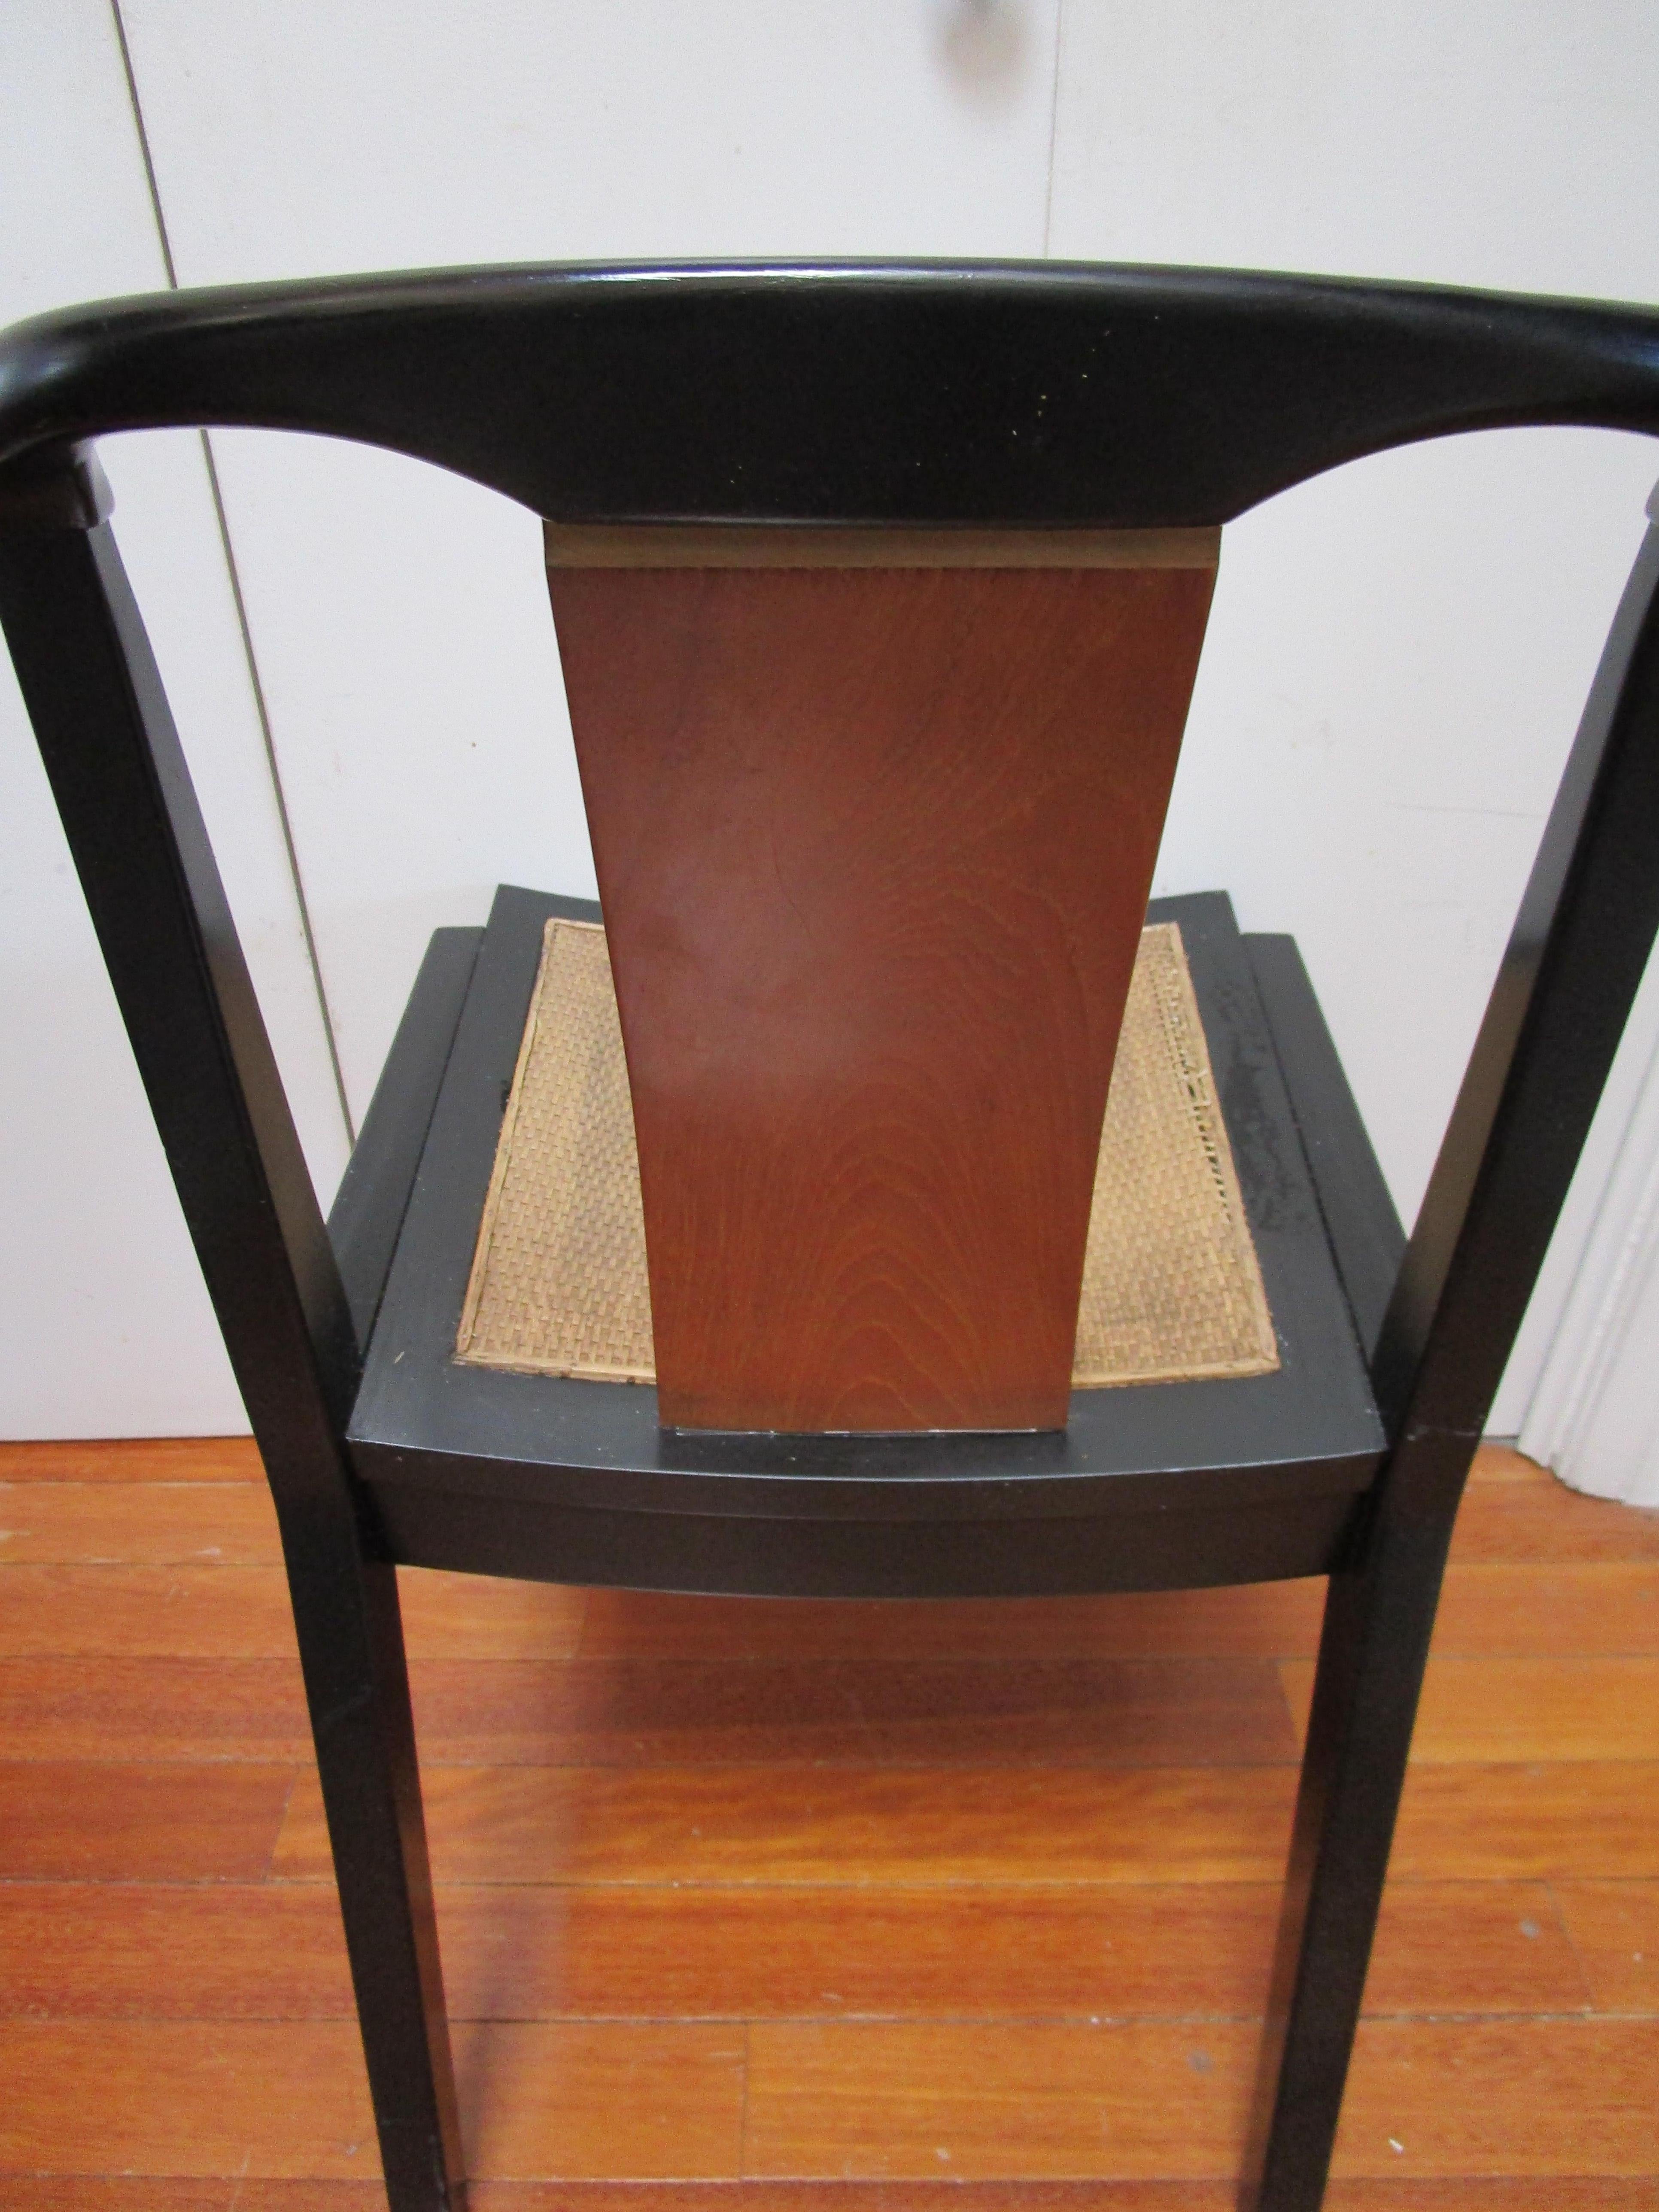 Highly collectible, this is a piece from the Baker Far East Collection of the 1950s. It is unique. The chair was designed as part of a two-piece set with a desk. It has all of the graceful design style of Michael Taylor with the distinctive walnut